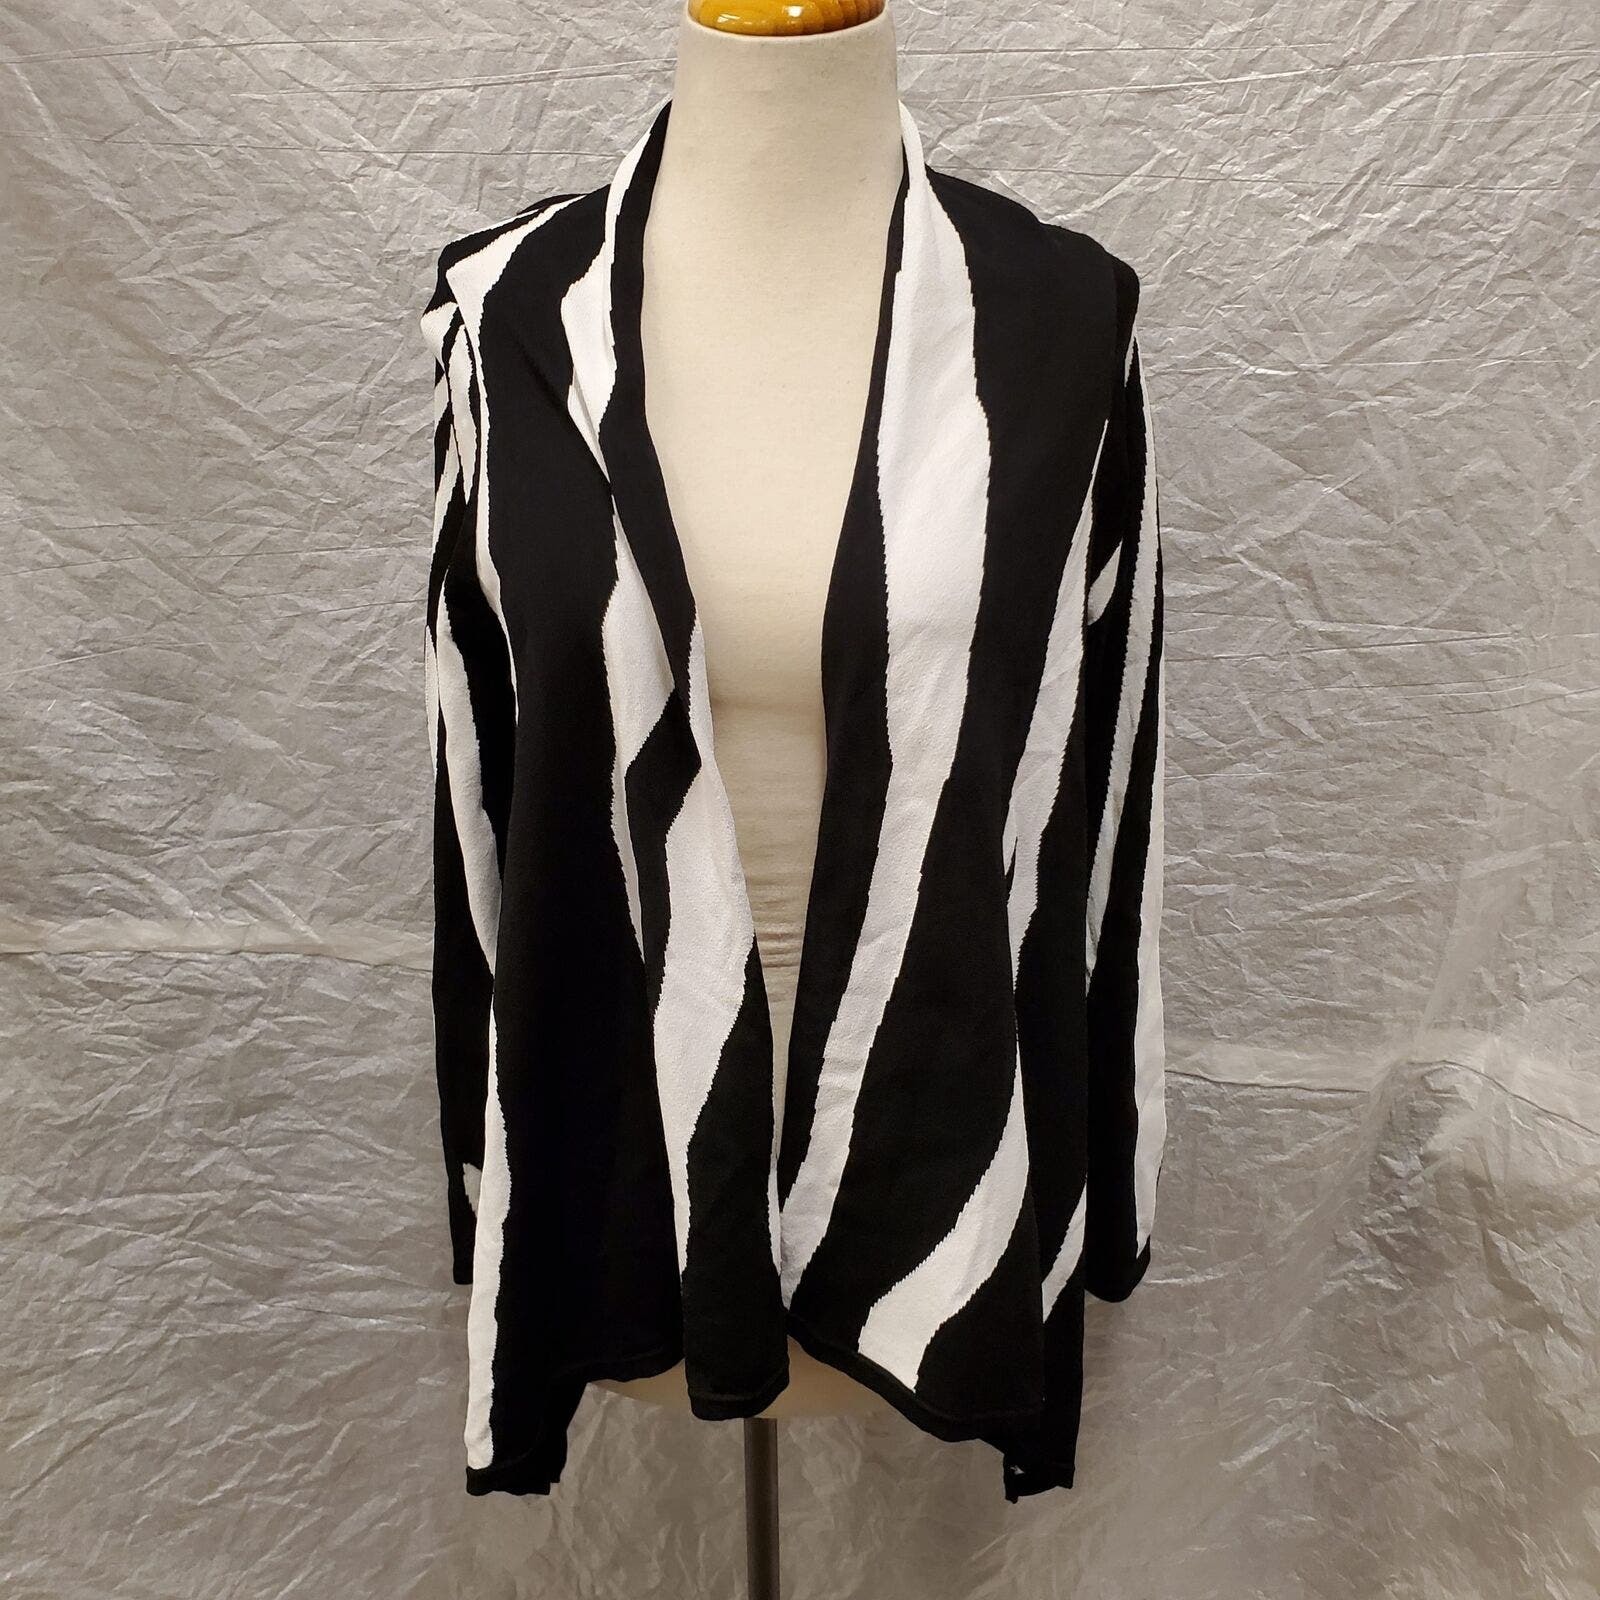 Primary image for Jones New York Signature Women's Black and White Cardigan, Size PM